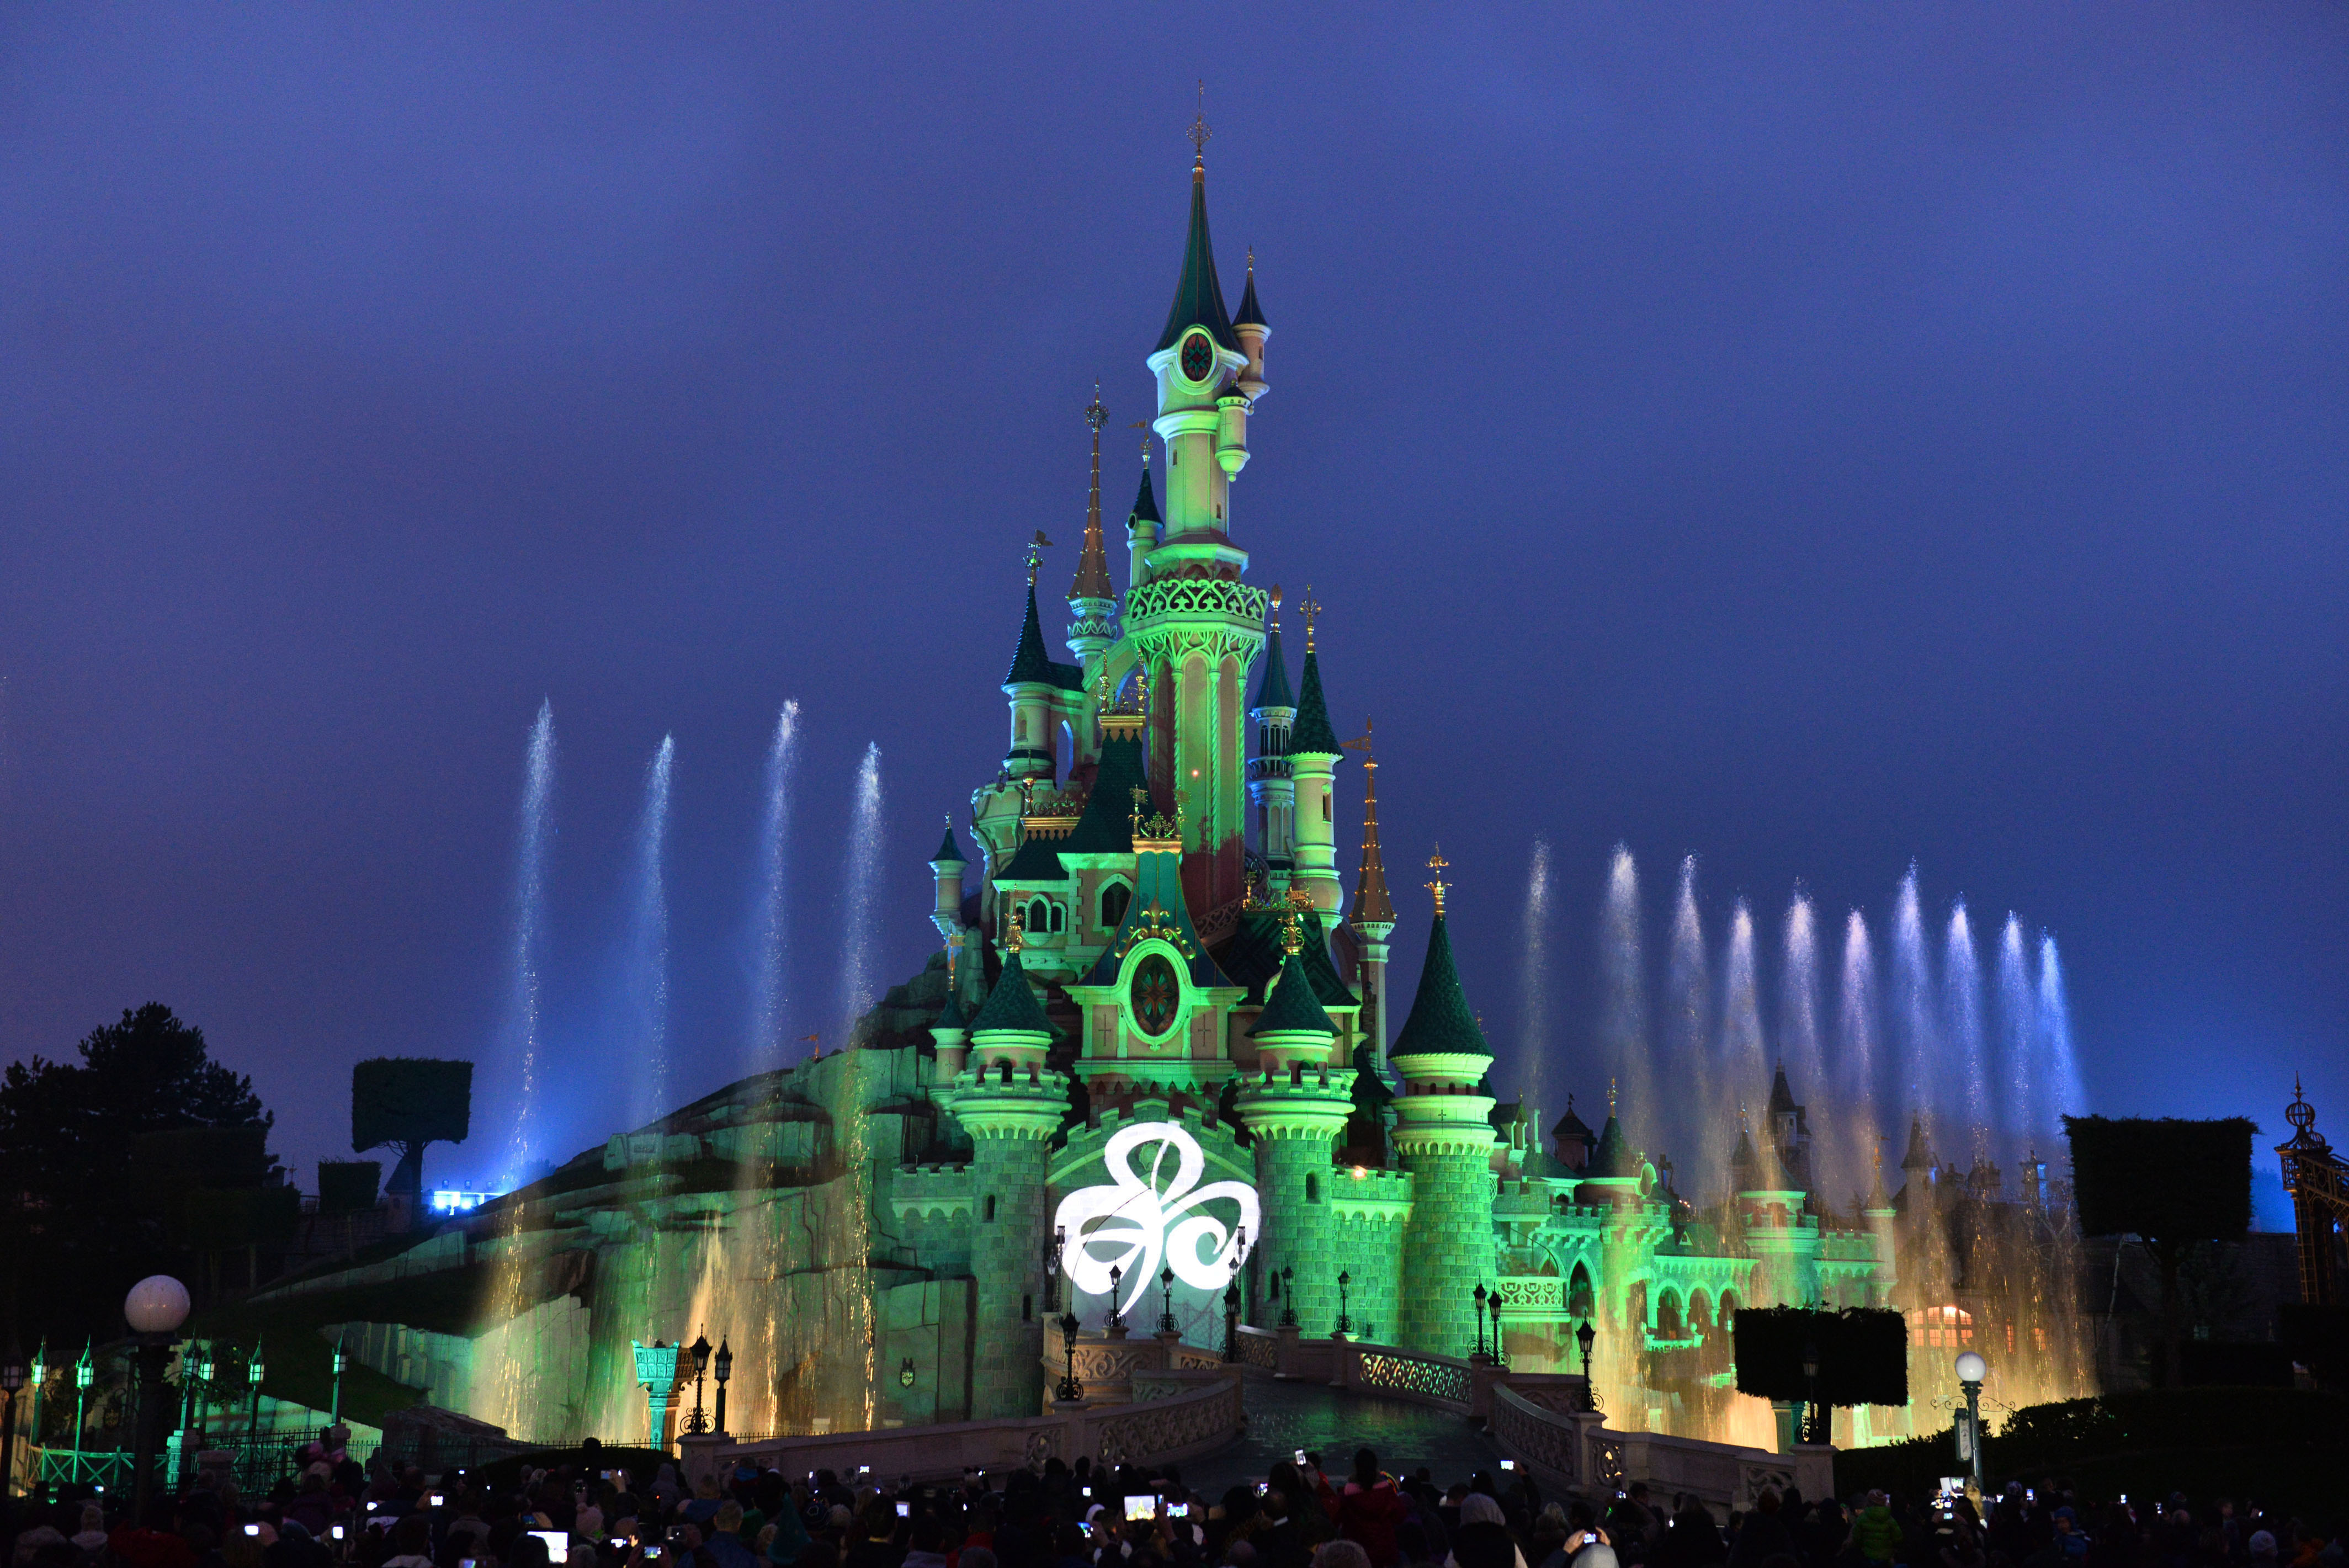 While across the Channel in France, Sleeping Beauty’s Castle at Disneyland Paris also turned green 